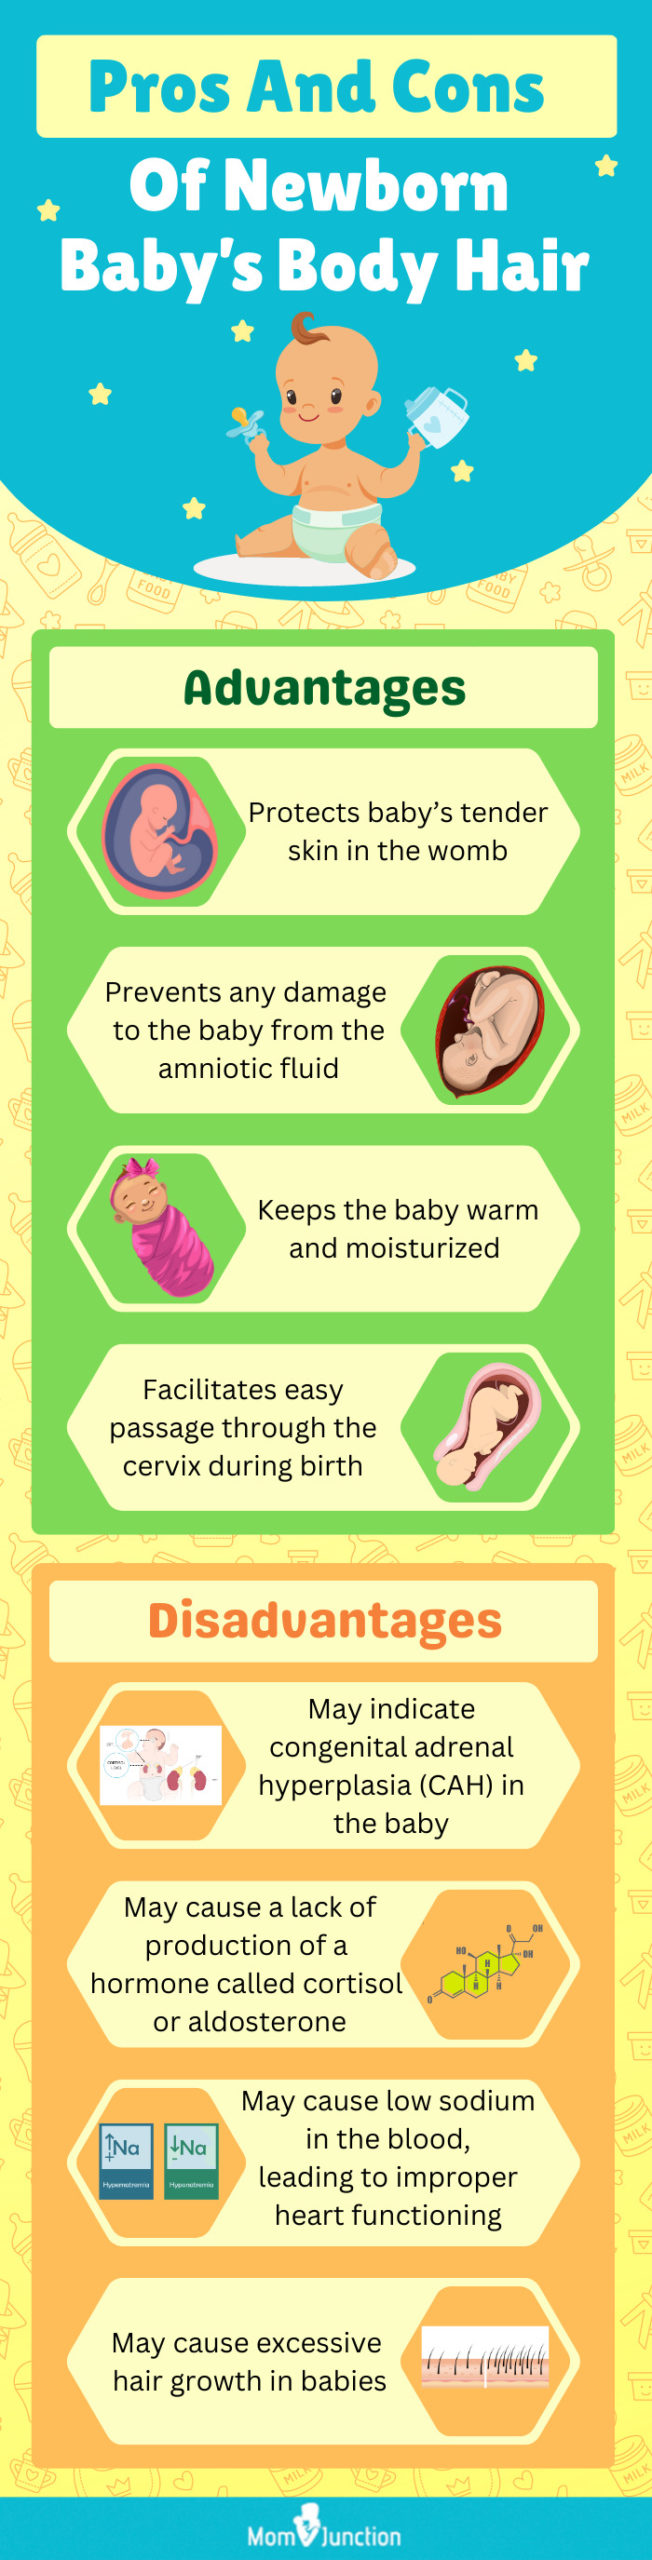 pros and cons of newborn baby's body hair [infographic]